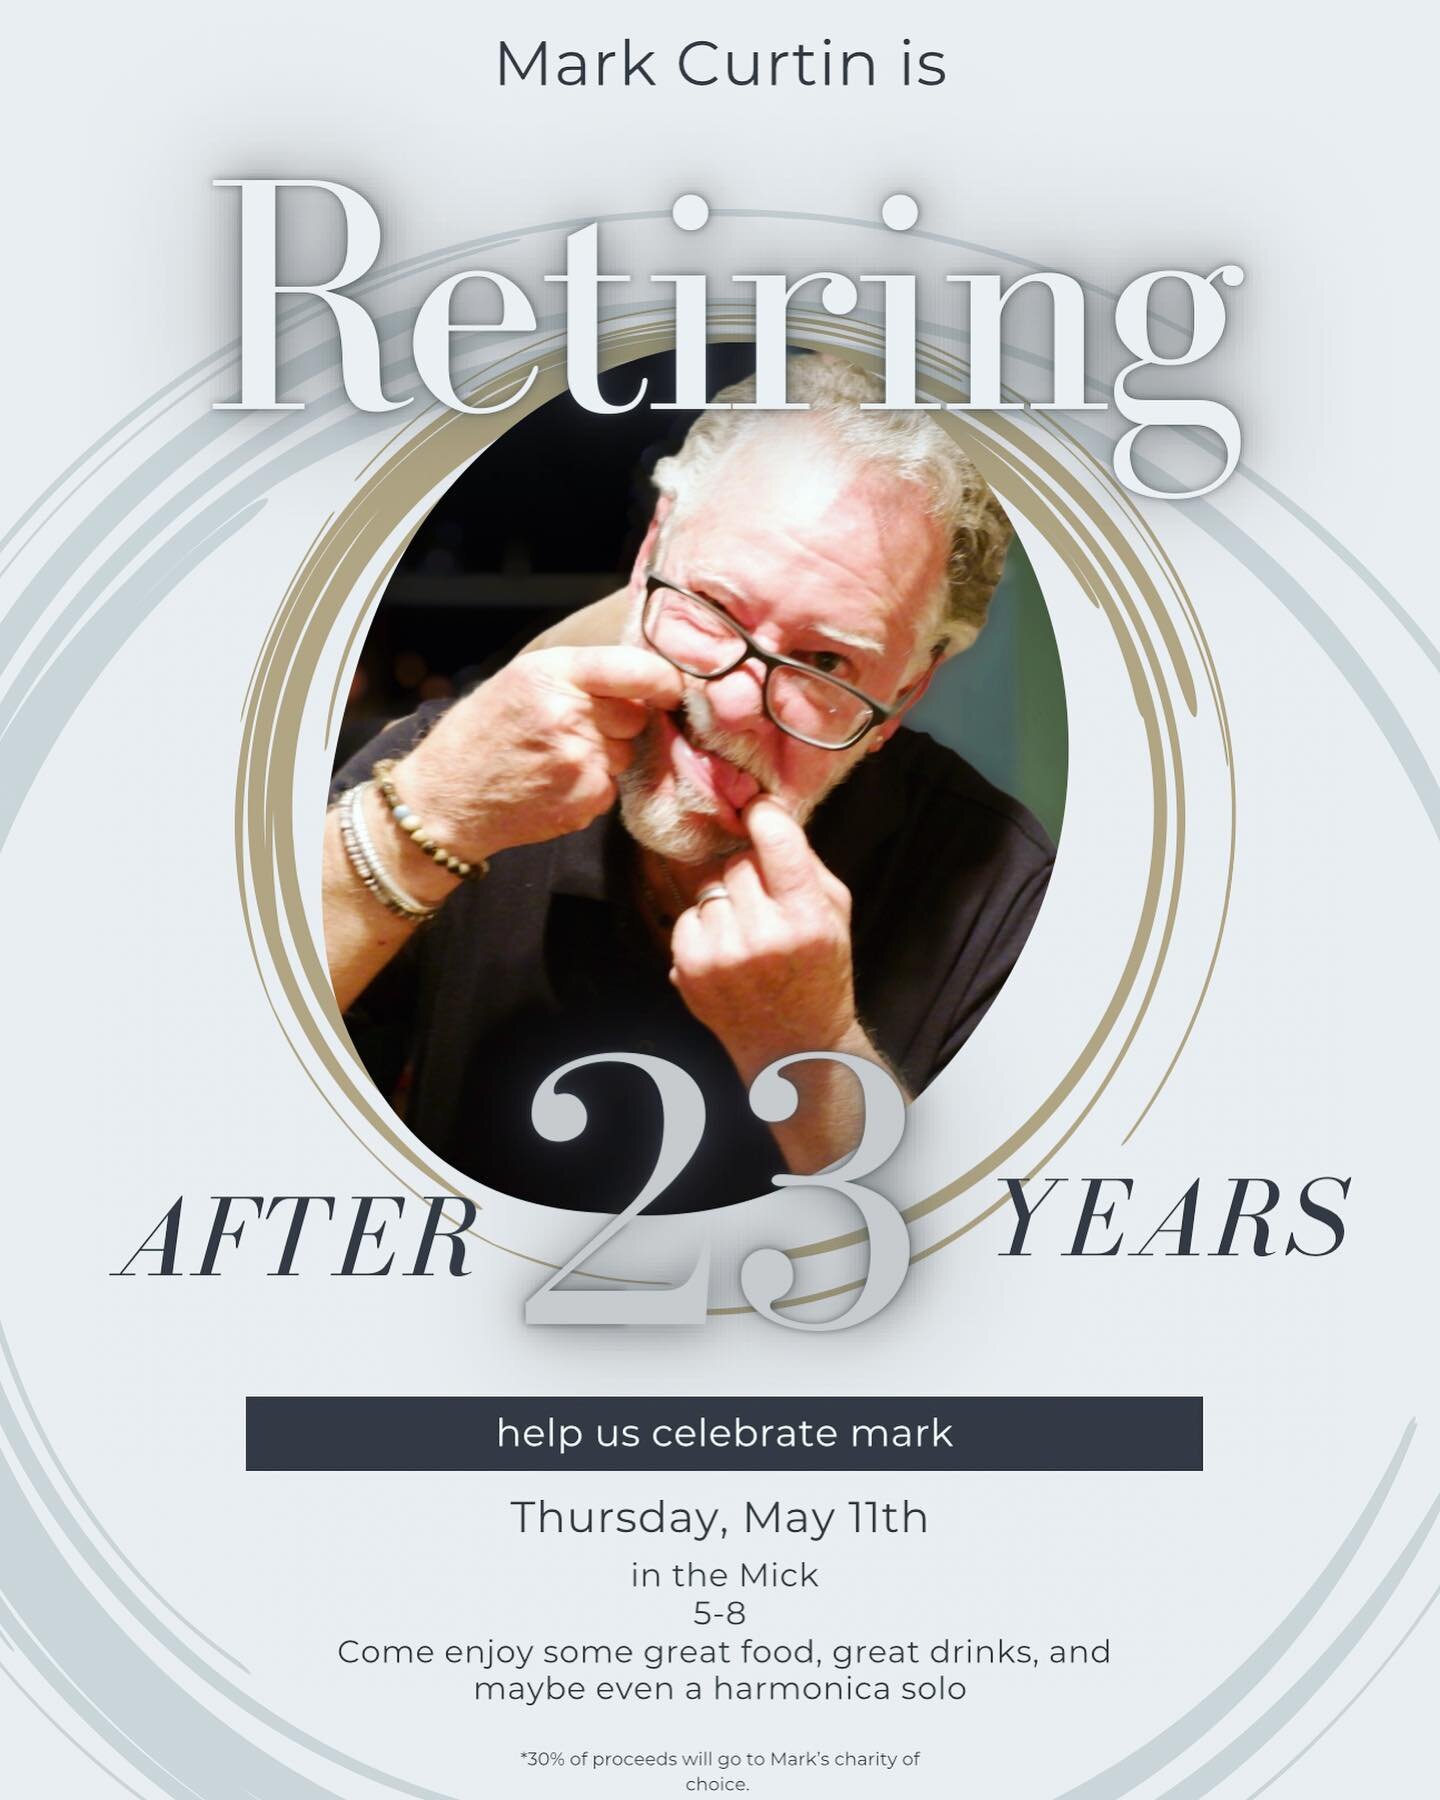 Join us Thursday to help us celebrate Mark! Not only is he a wiz behind the bar, he is also a gifted painter and harmonica enthusiast. Our Mark of all trades has blessed us with 23 years of dedicated service and he will be missed! Stop by anytime bet